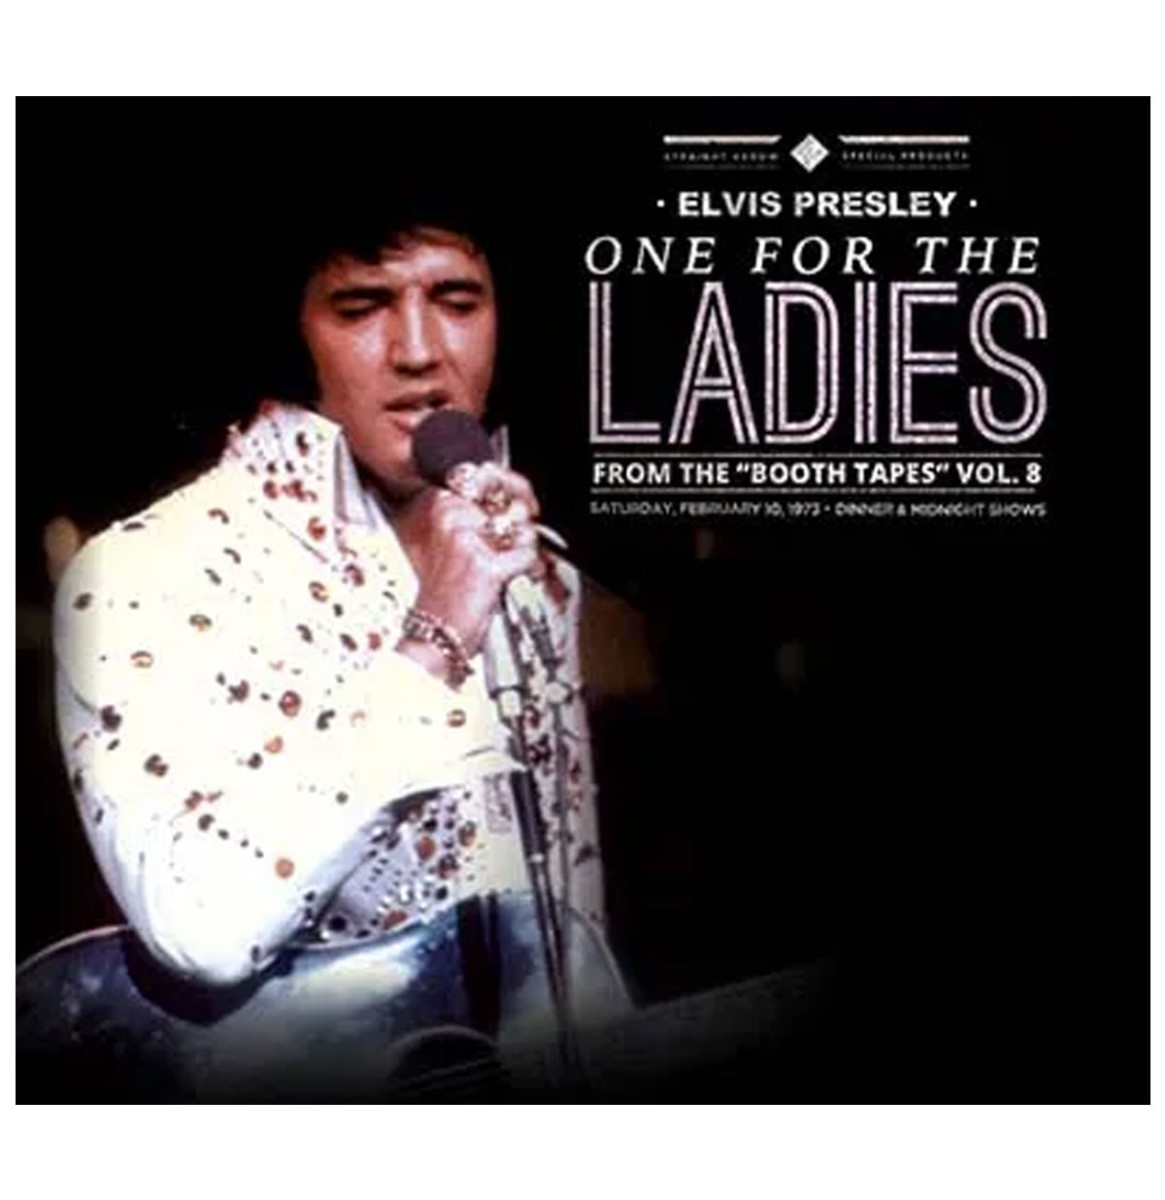 Elvis Presley - One For The Ladies - From The "Booth Tapes" Vol. 8 - 2CD Set